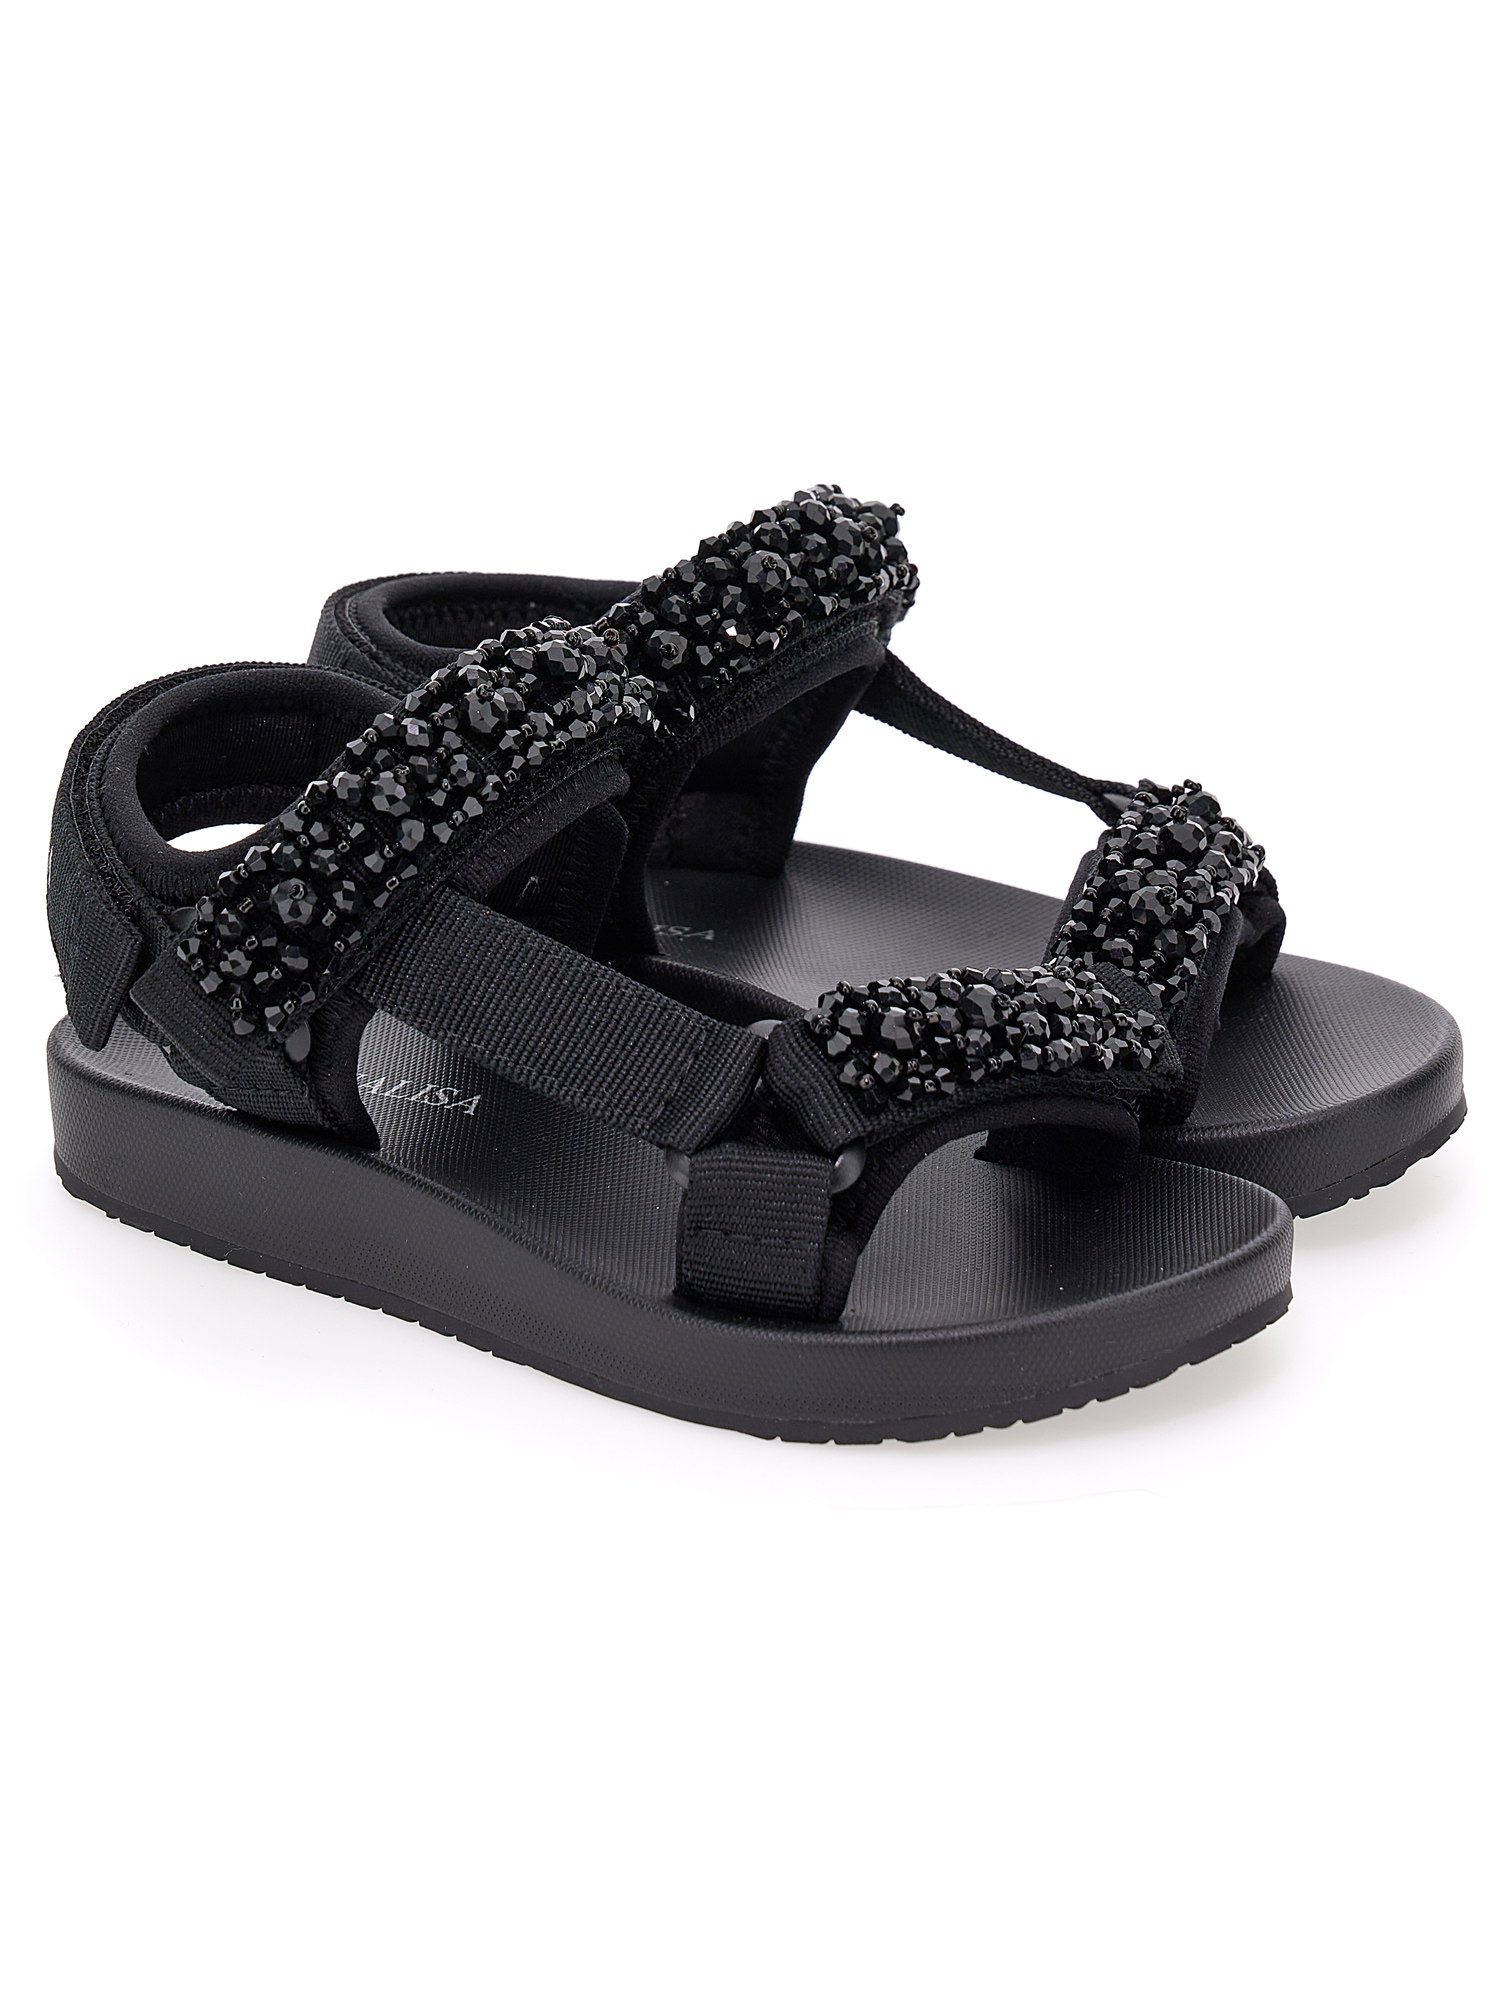 Shop Monnalisa Technical Sandals With Pearls In Black